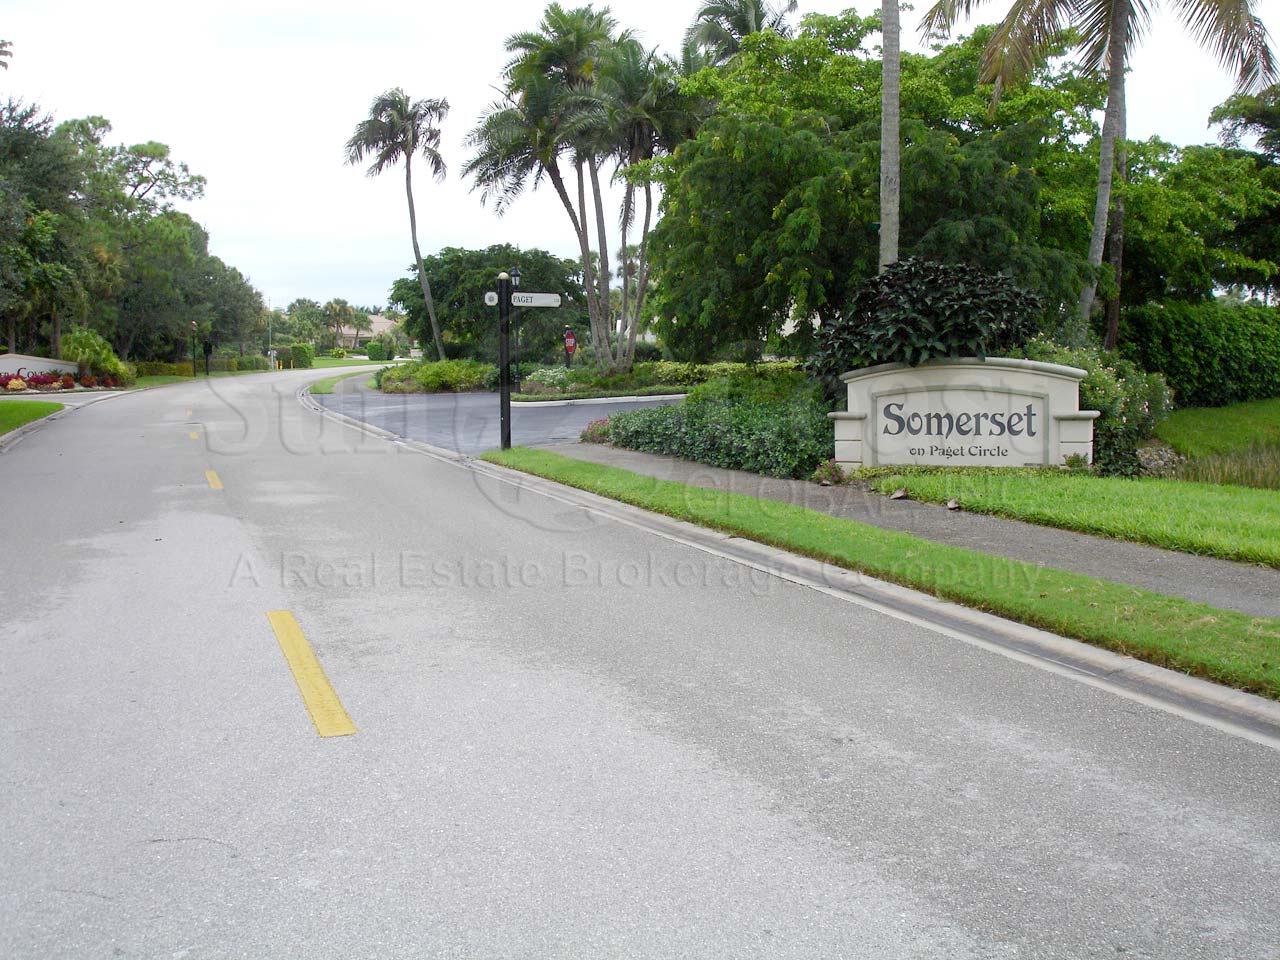 Somerset at Windstar entrance to non gated community within the gated Windstar community